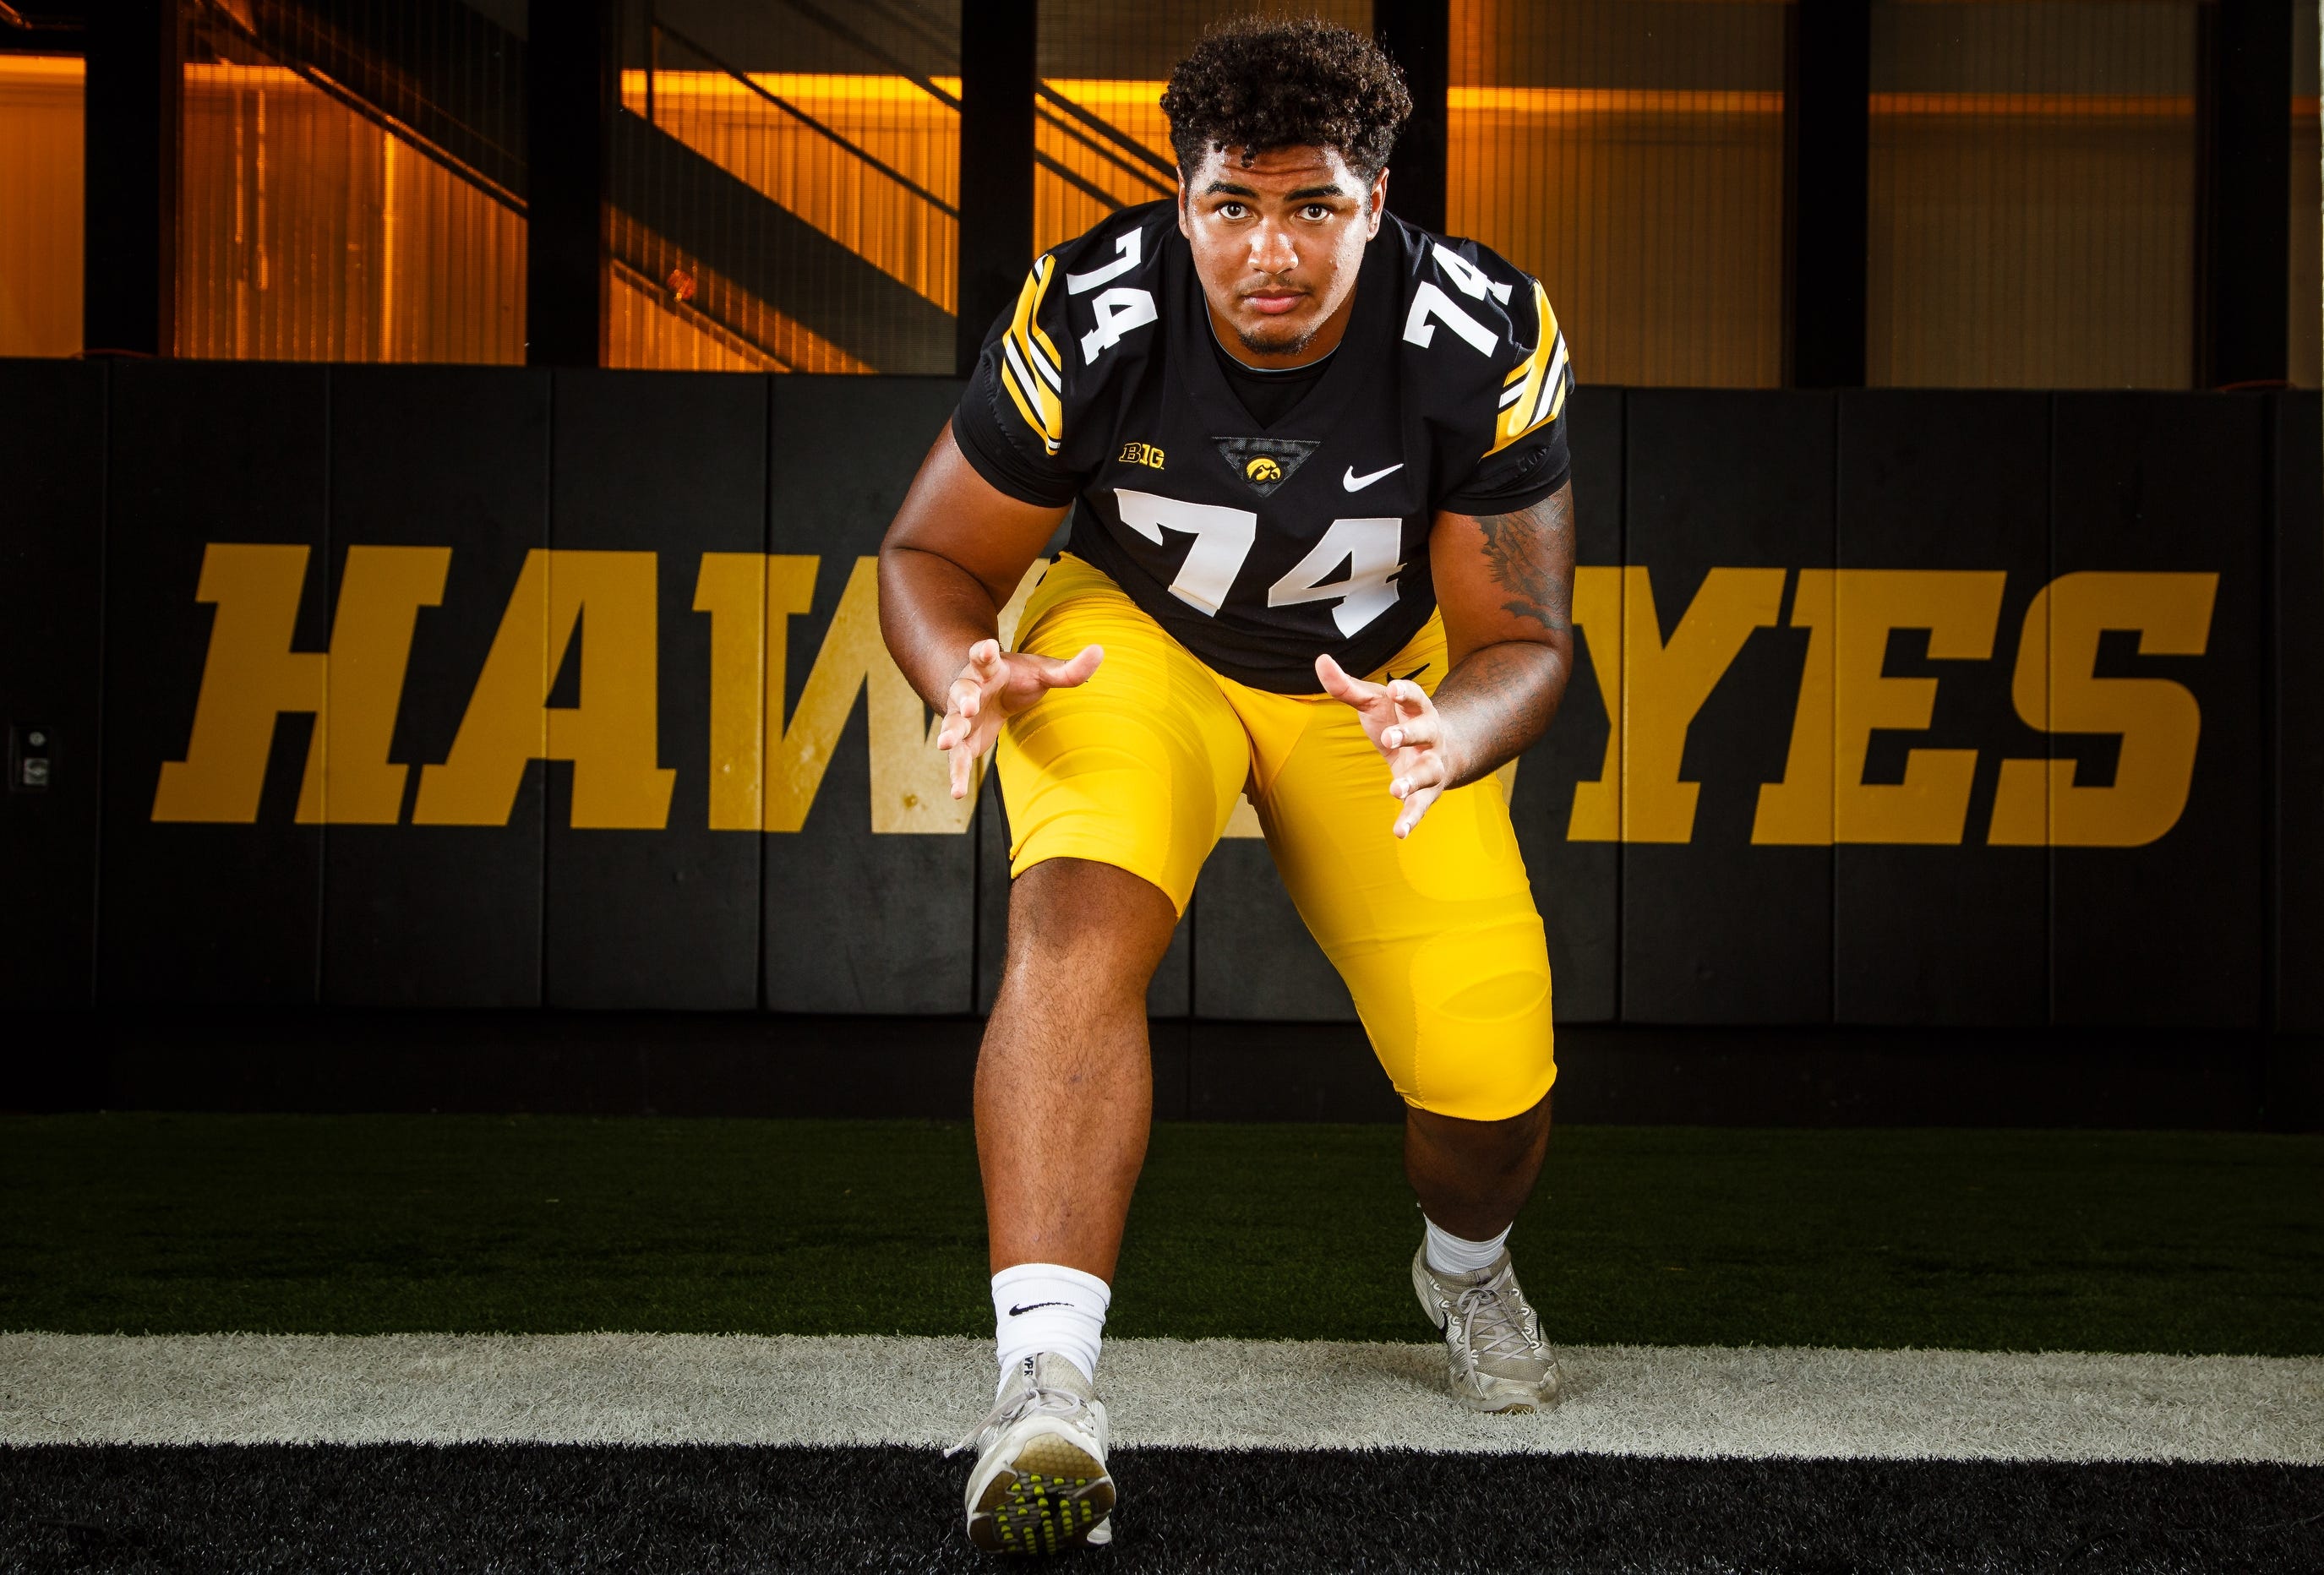 Iowa's Tristan Wirfs poses for a photo during the Iowa Football media day on Friday, Aug. 10, 2018 in Iowa City.